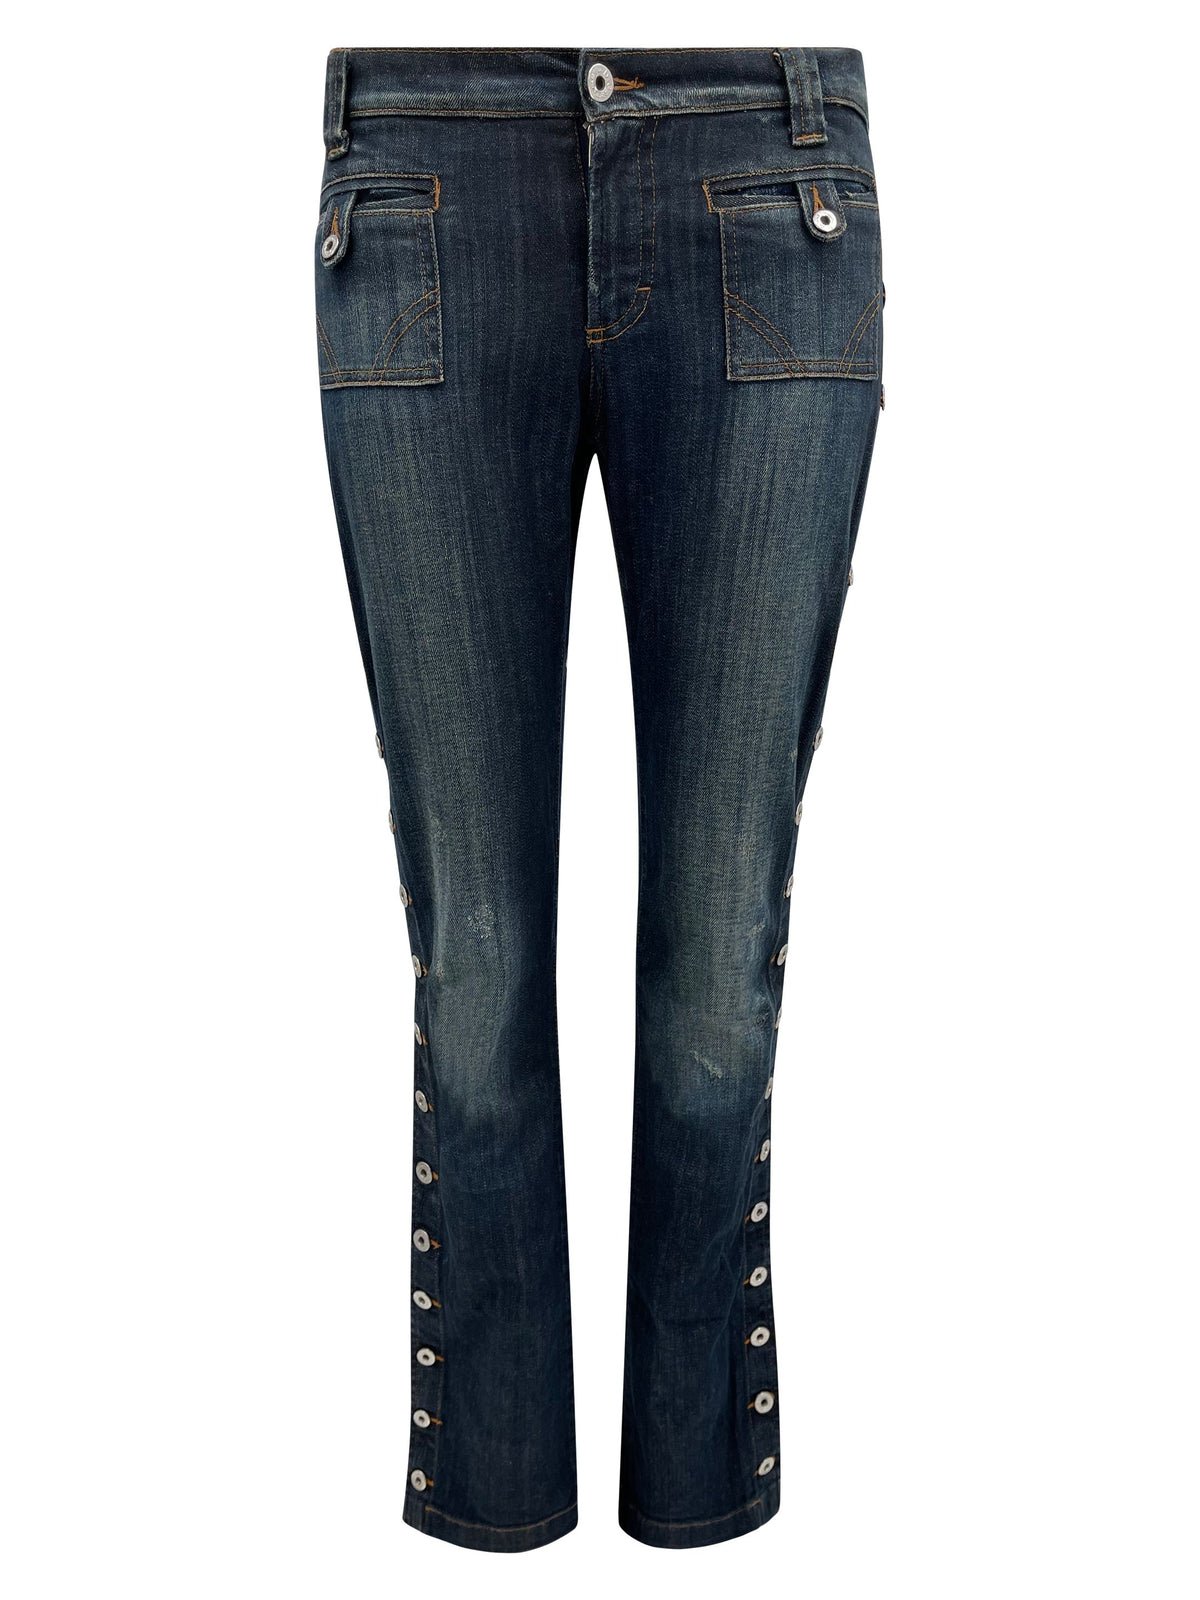 2005 Dolce & Gabbana Side Button Jeans - ONFEMME By Lindsey's Kloset